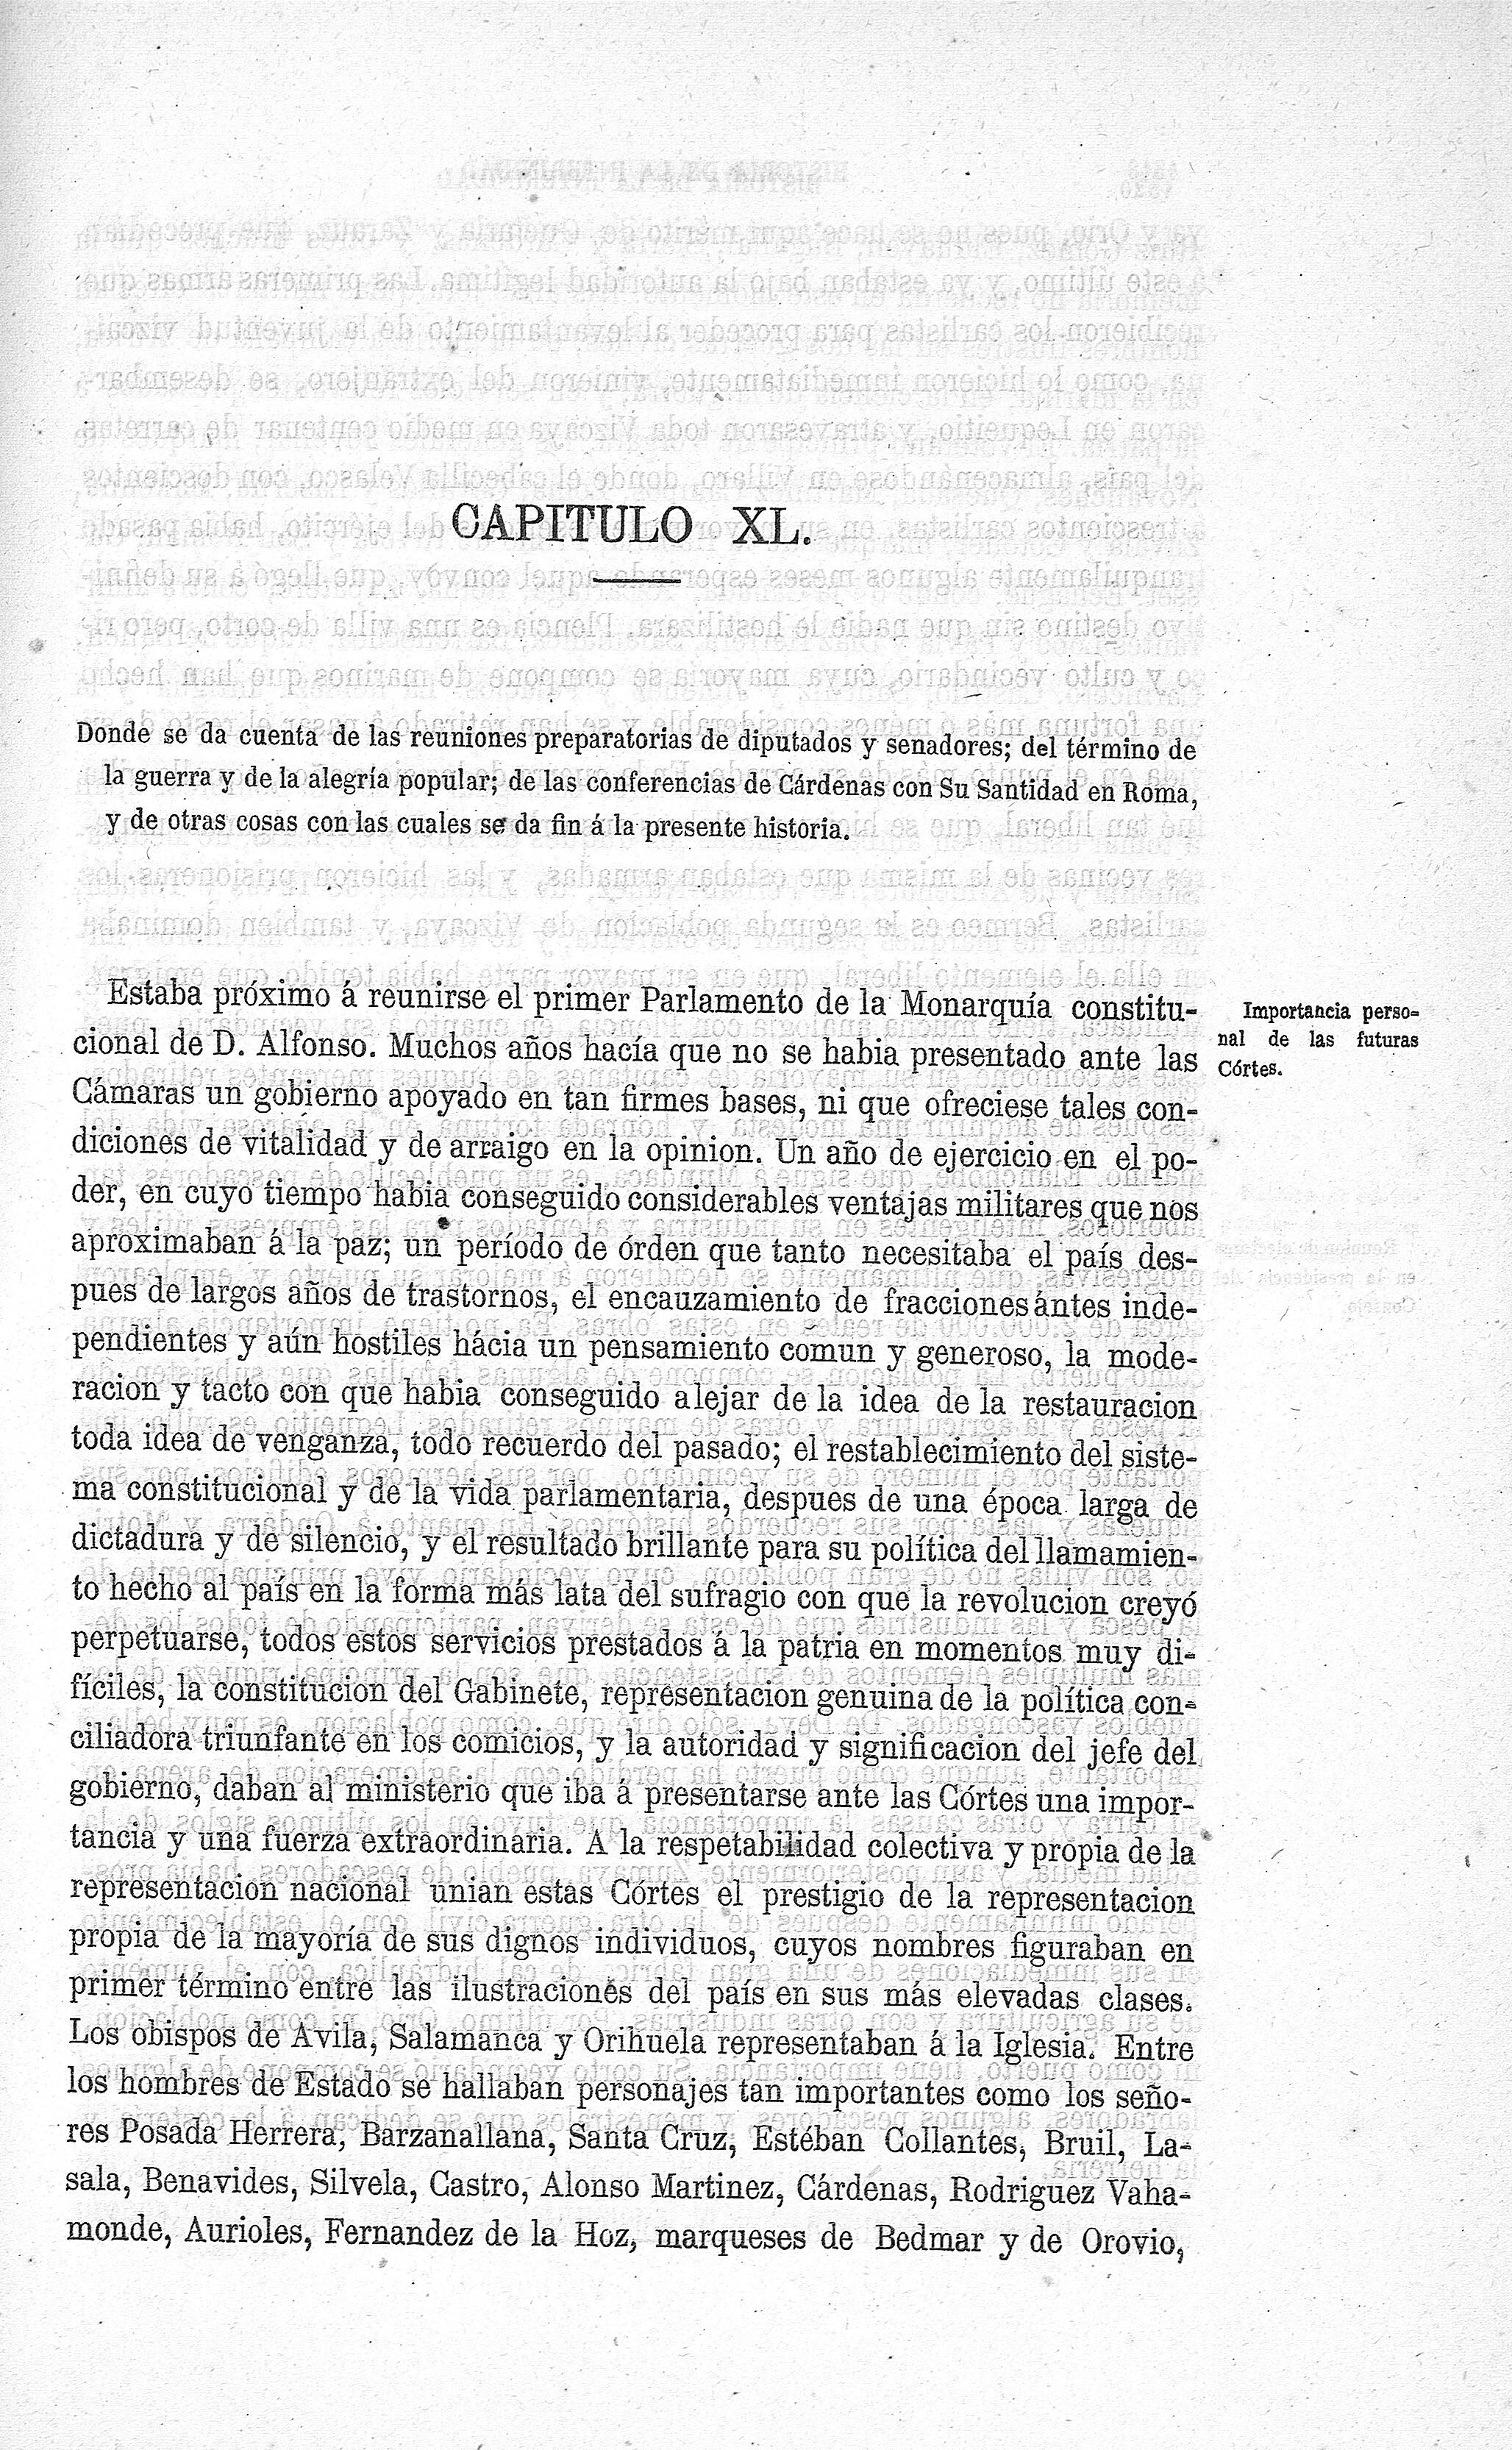 Capitulo XL.